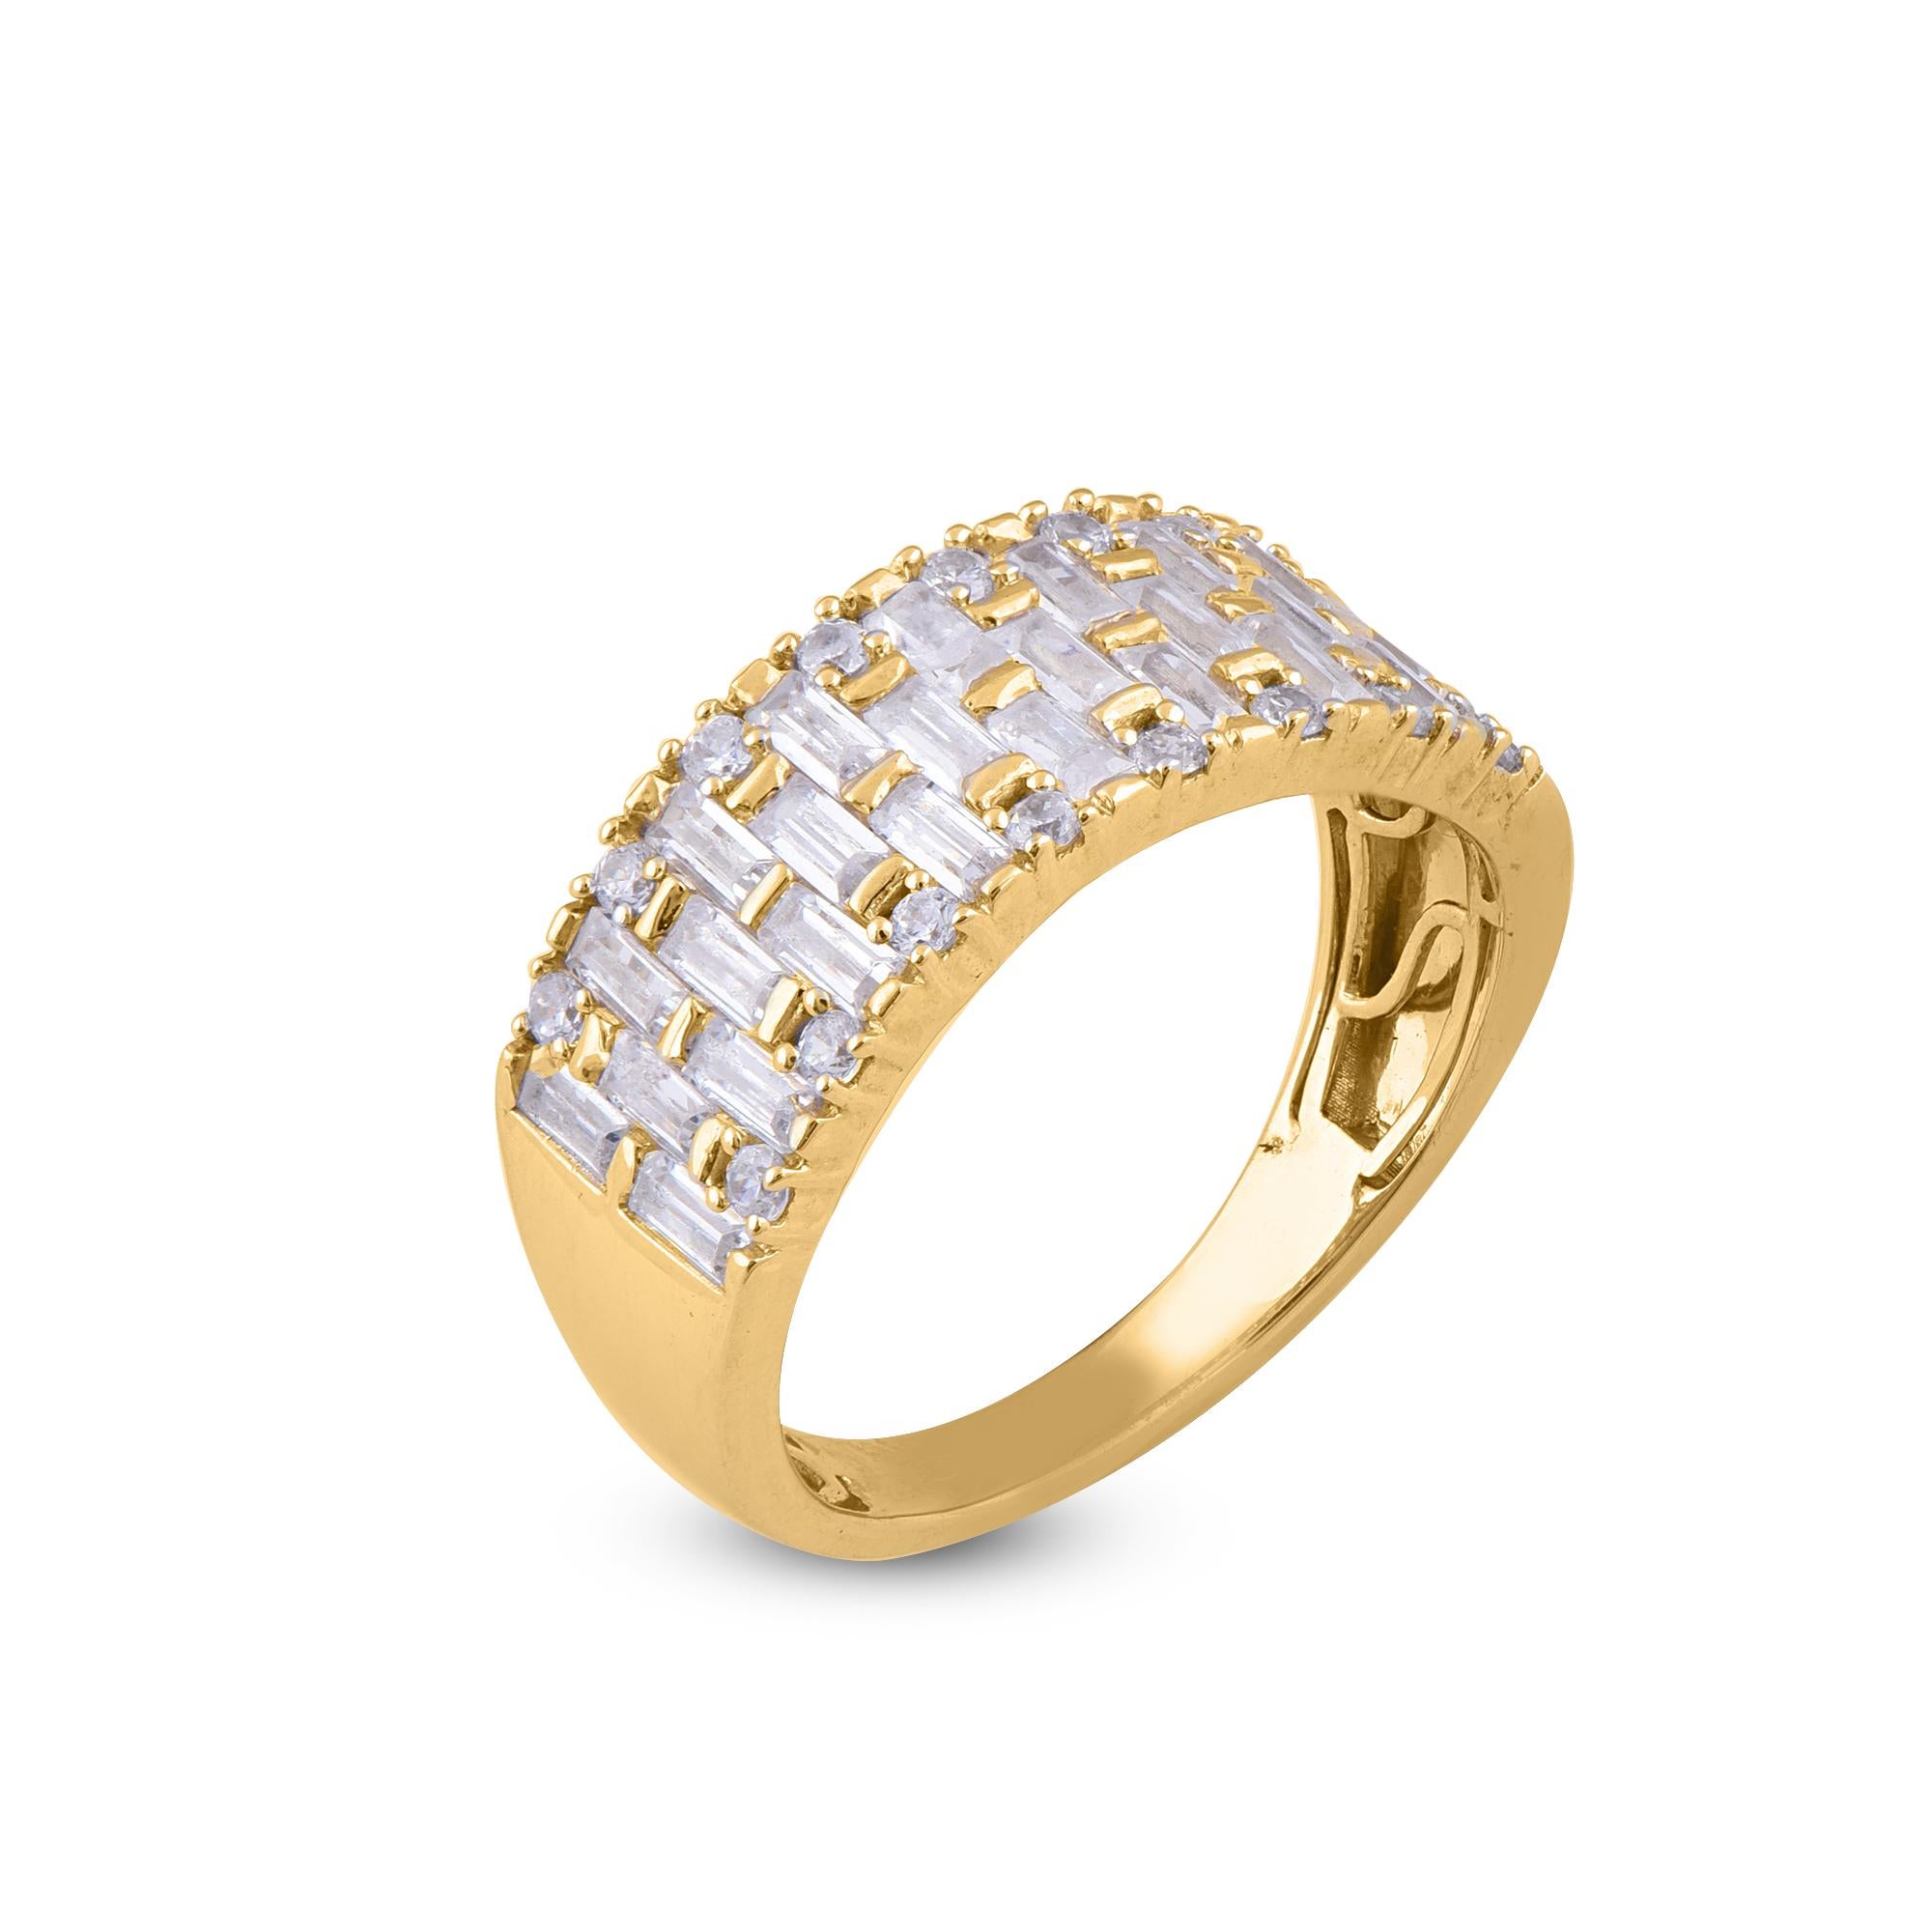 Bring charm to your look with this diamond ring. The ring is crafted from 14-karat gold in your choice of white, rose, or yellow, and features Round Brilliant 16 and Baguette - 26 white diamonds, Prong & Channel set, H-I color I2 clarity and a high